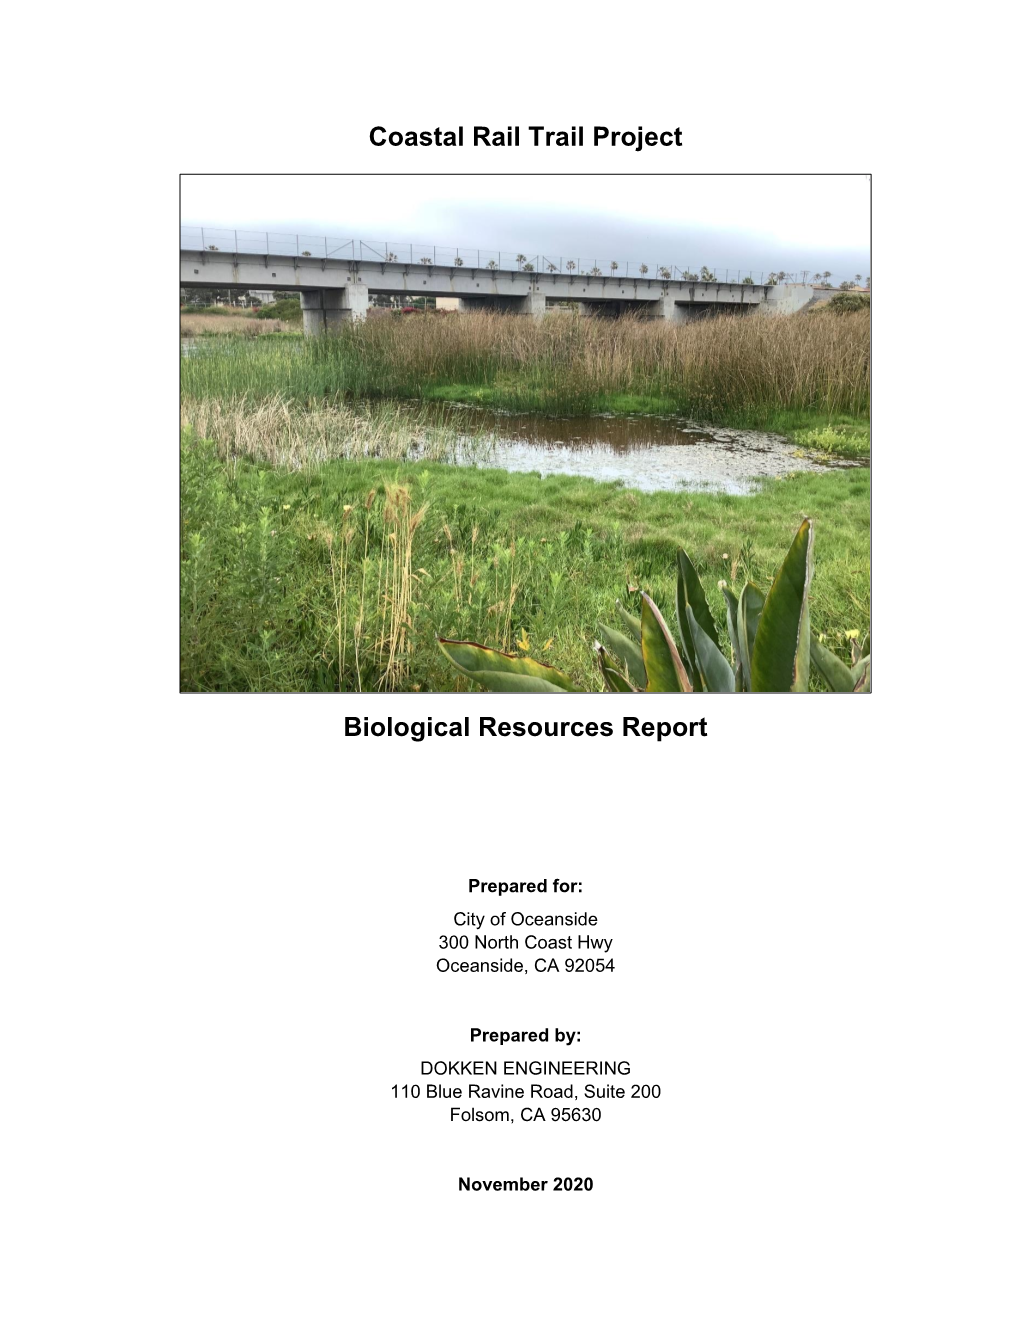 Coastal Rail Trail Project Biological Resources Report